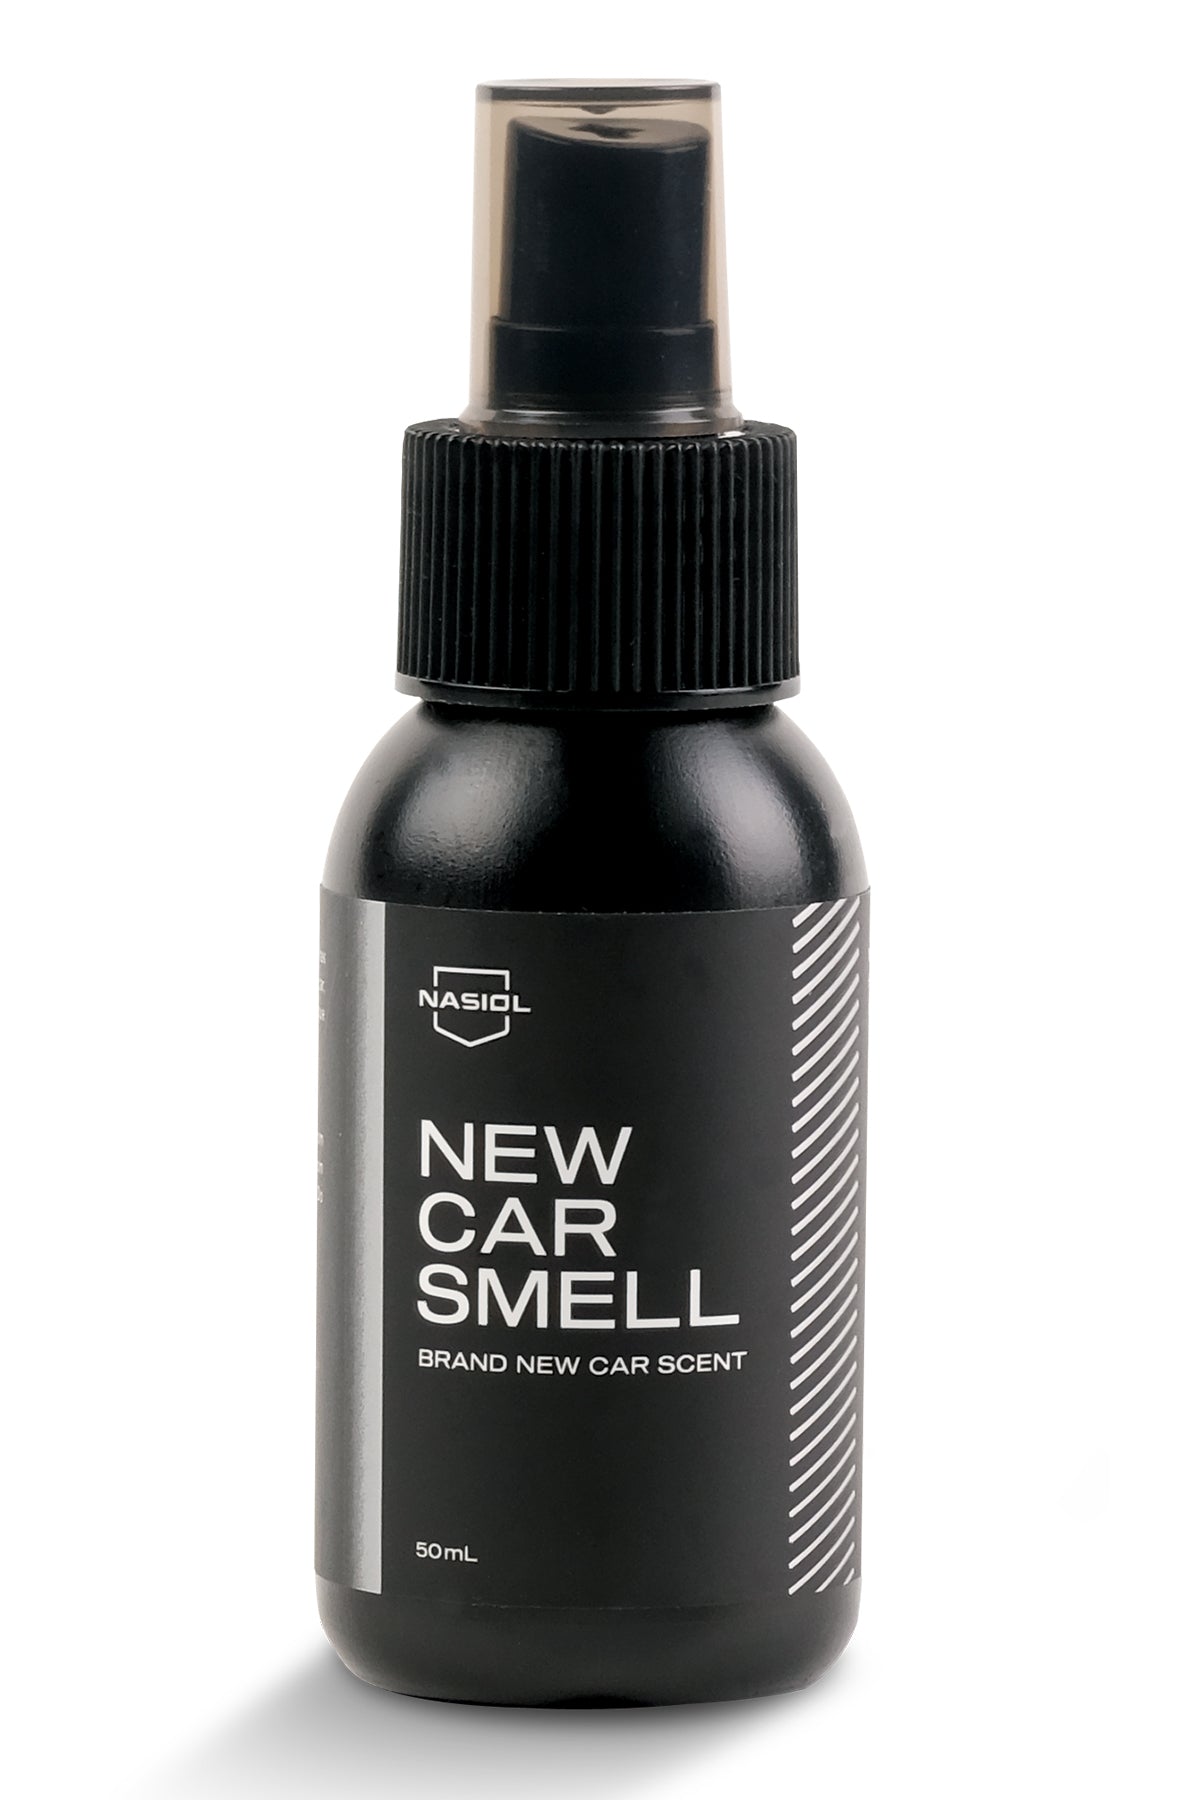 Nasiol NEW CAR SMELL New Car Scent 50mL